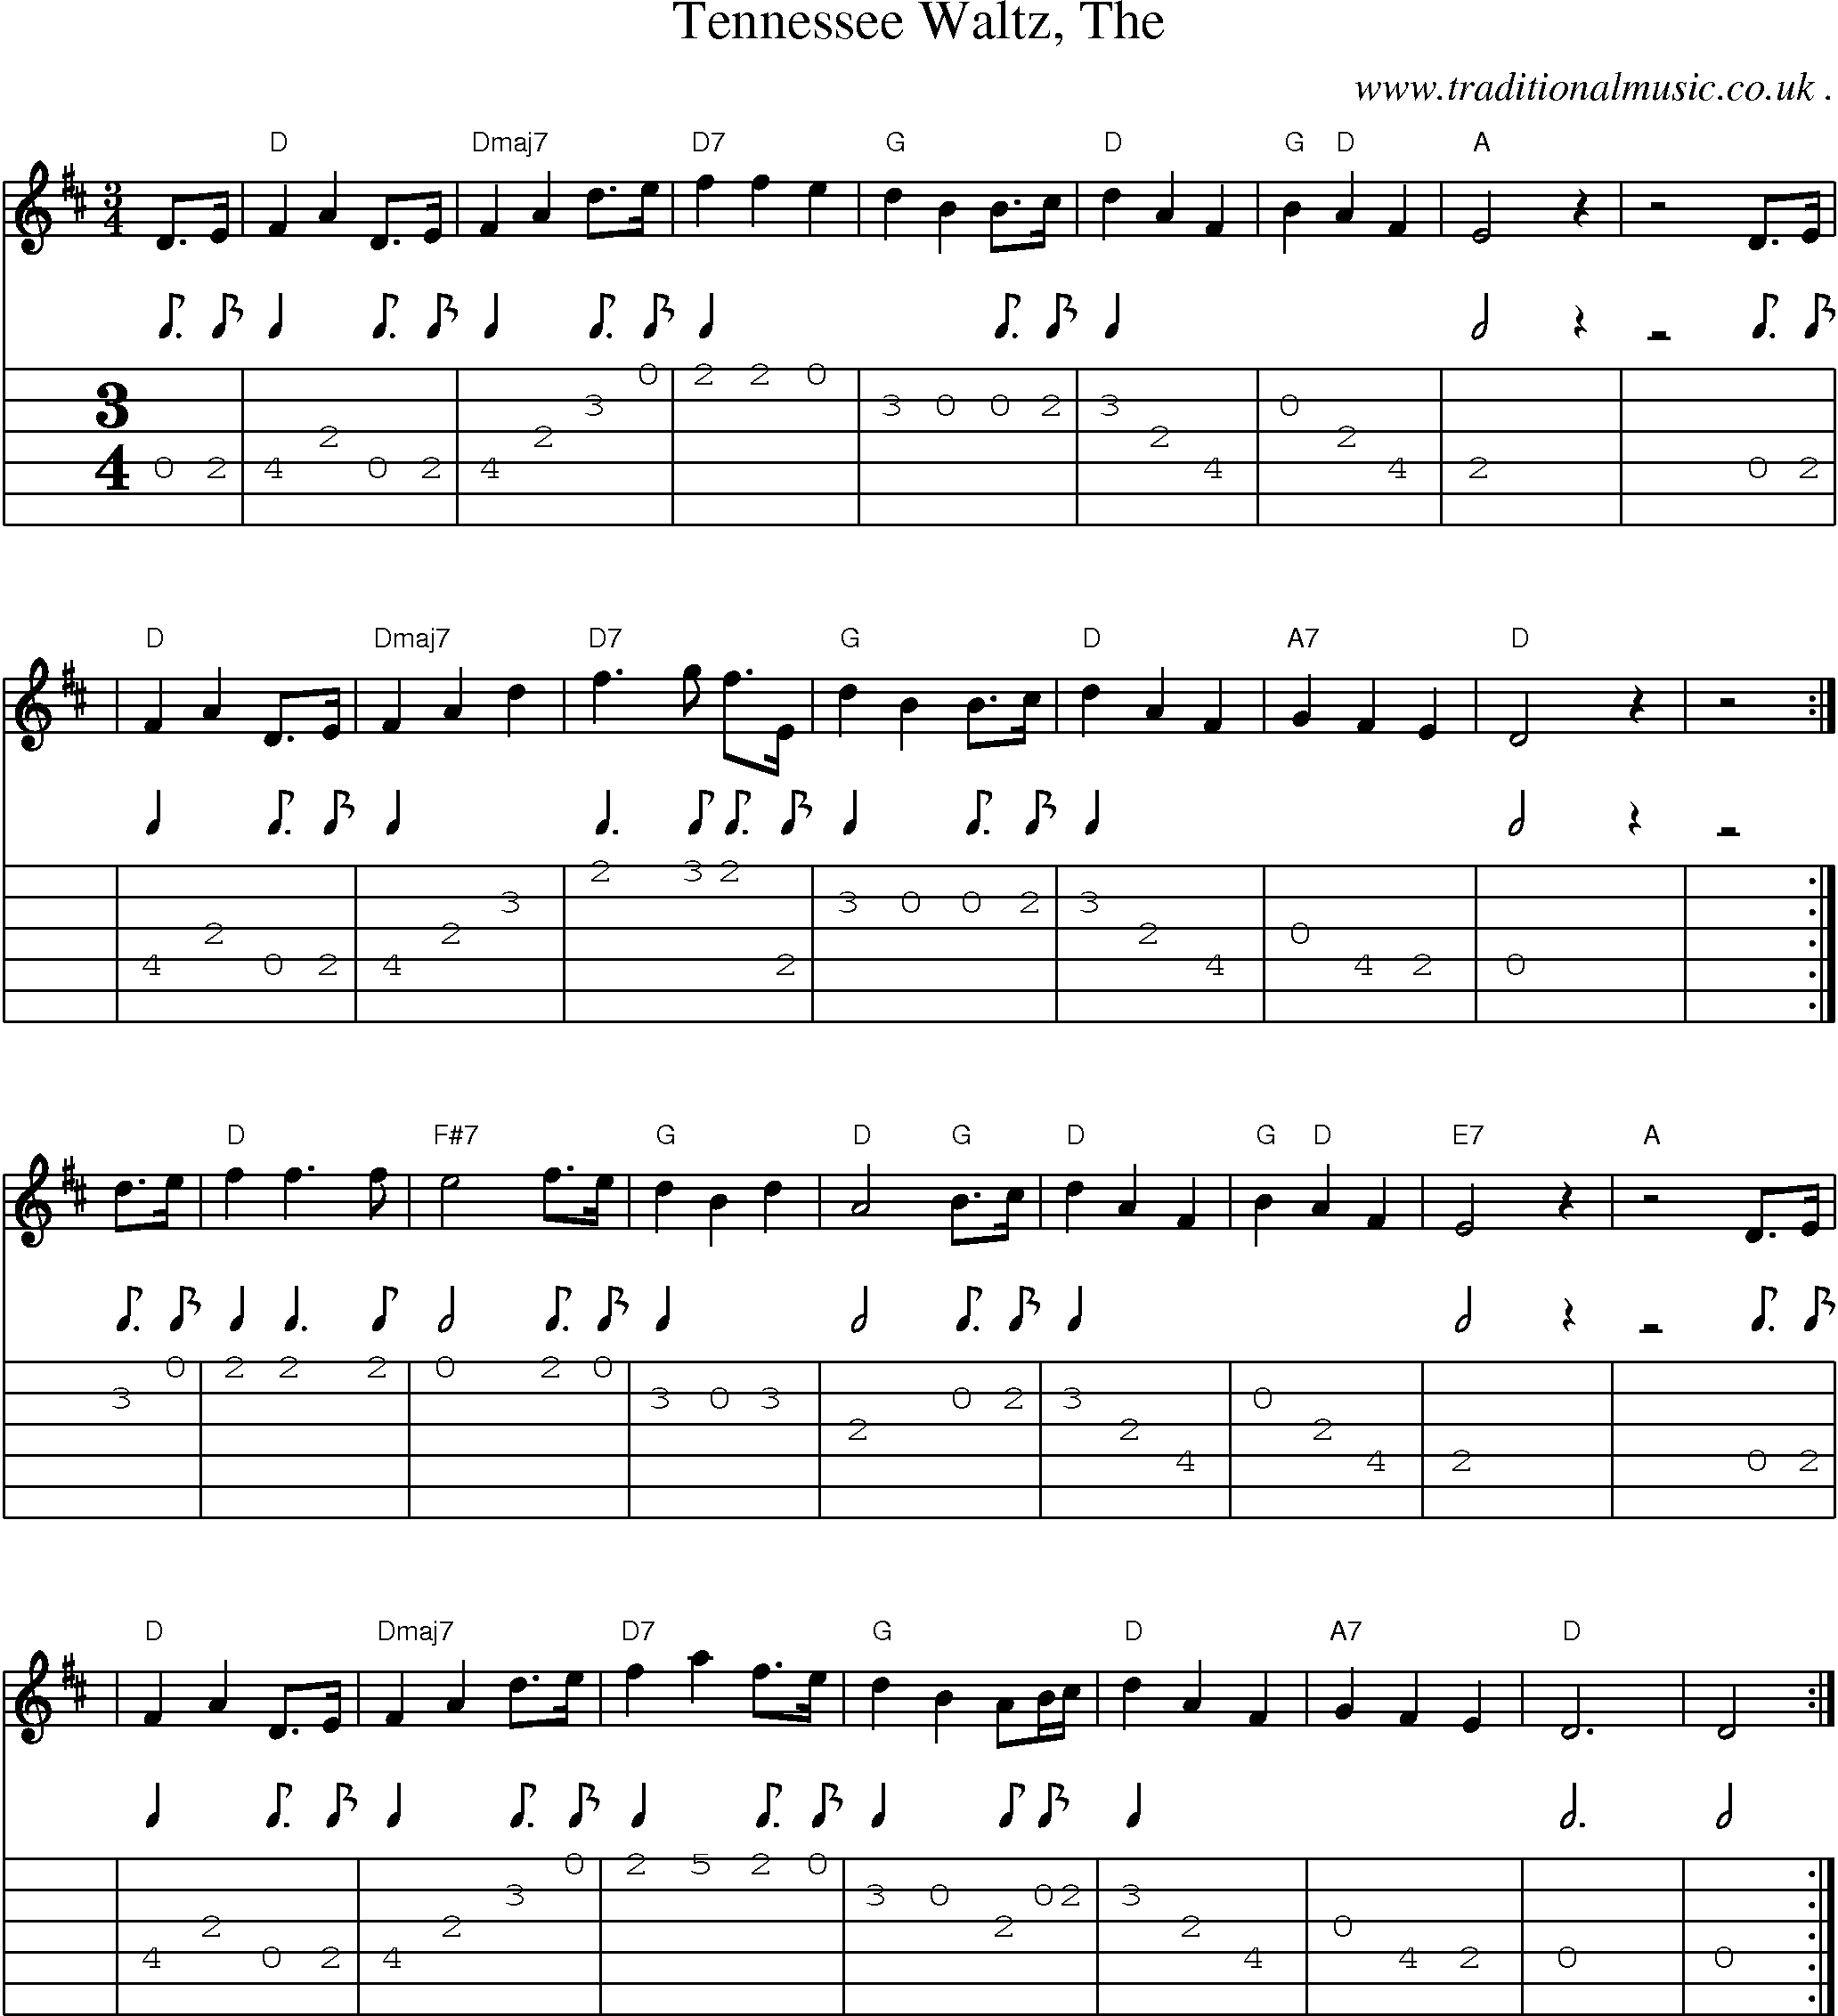 Music Score and Guitar Tabs for Tennessee Waltz The